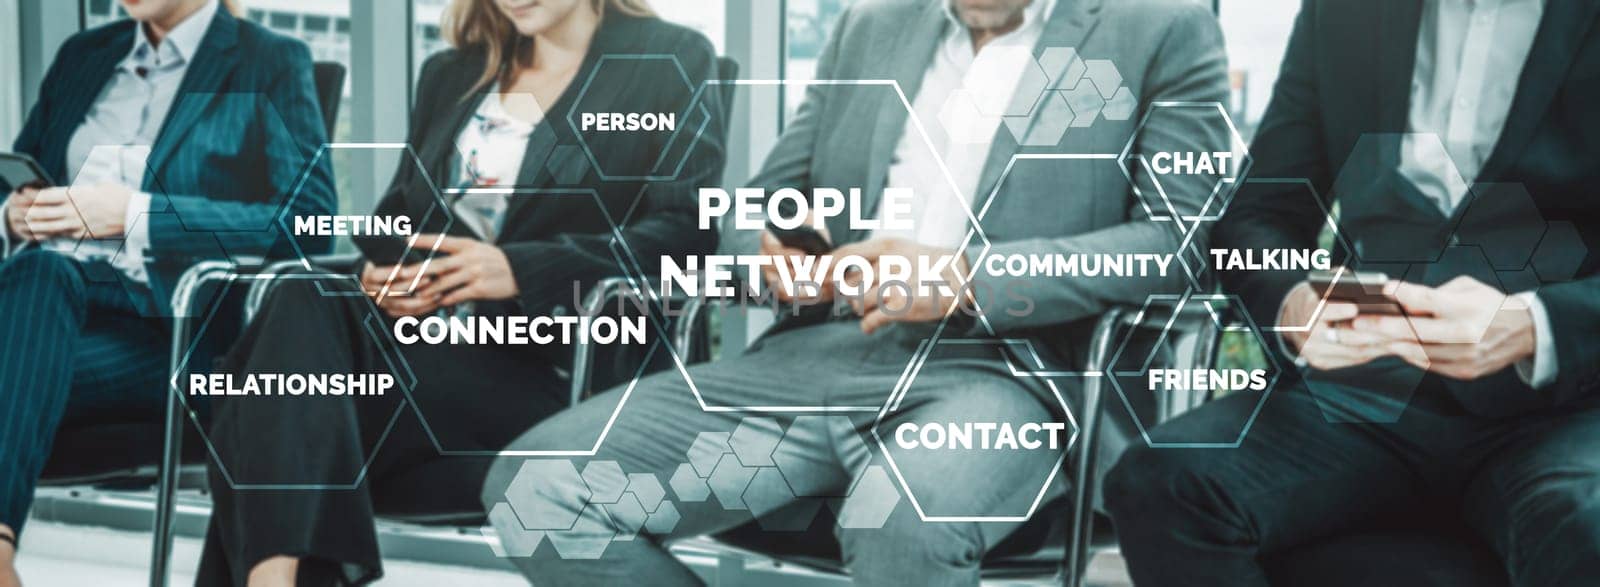 Human Resources and People Networking Concept uds by biancoblue